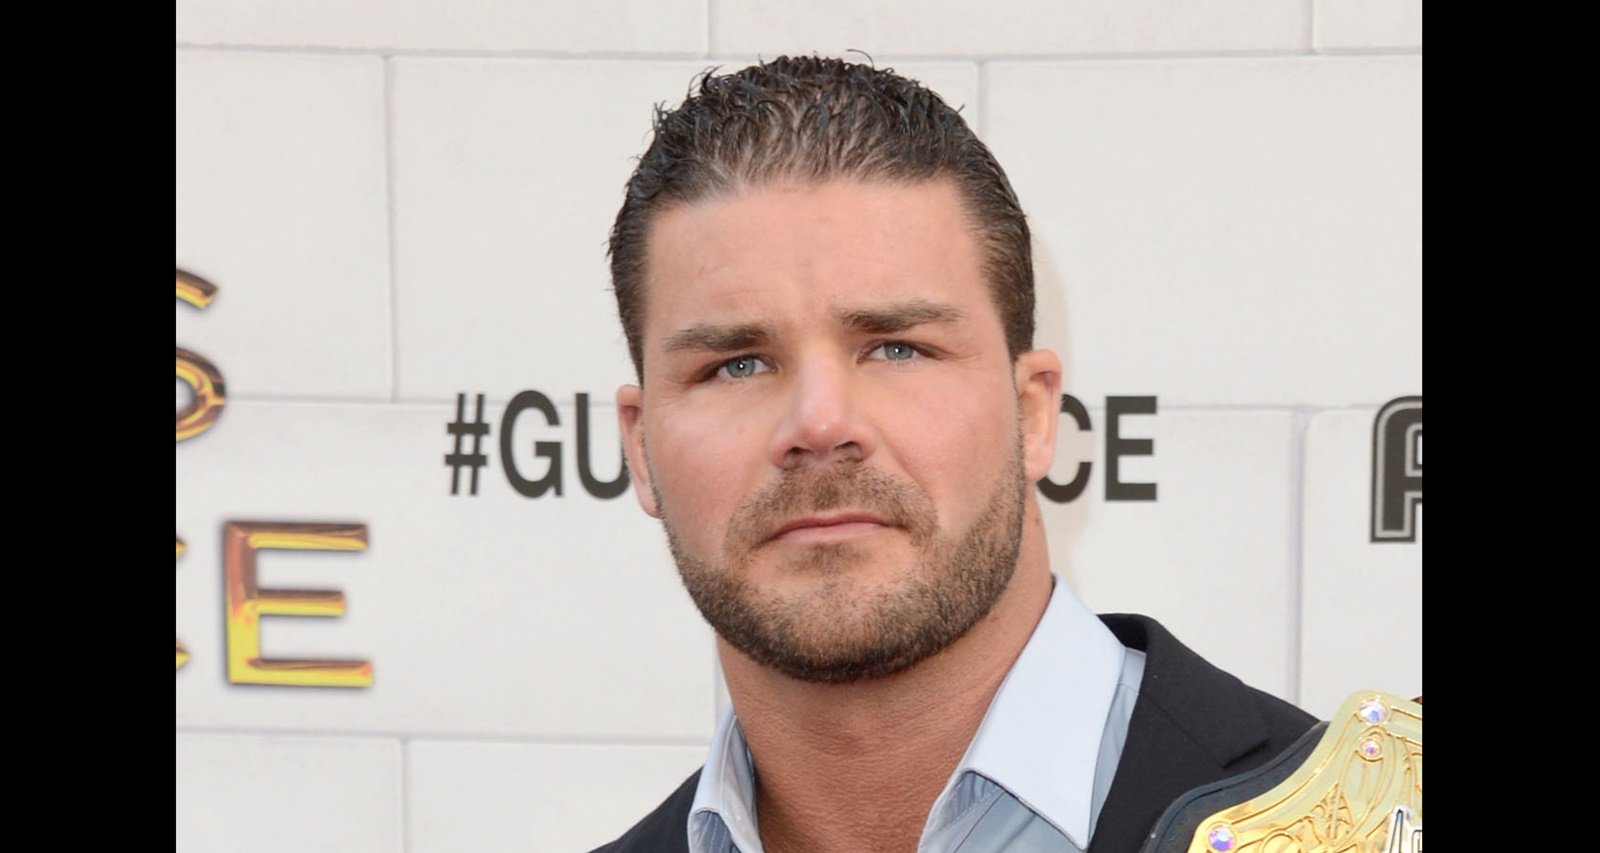 Wrestling fans are speculating about the relationship between Bobby Roode a...